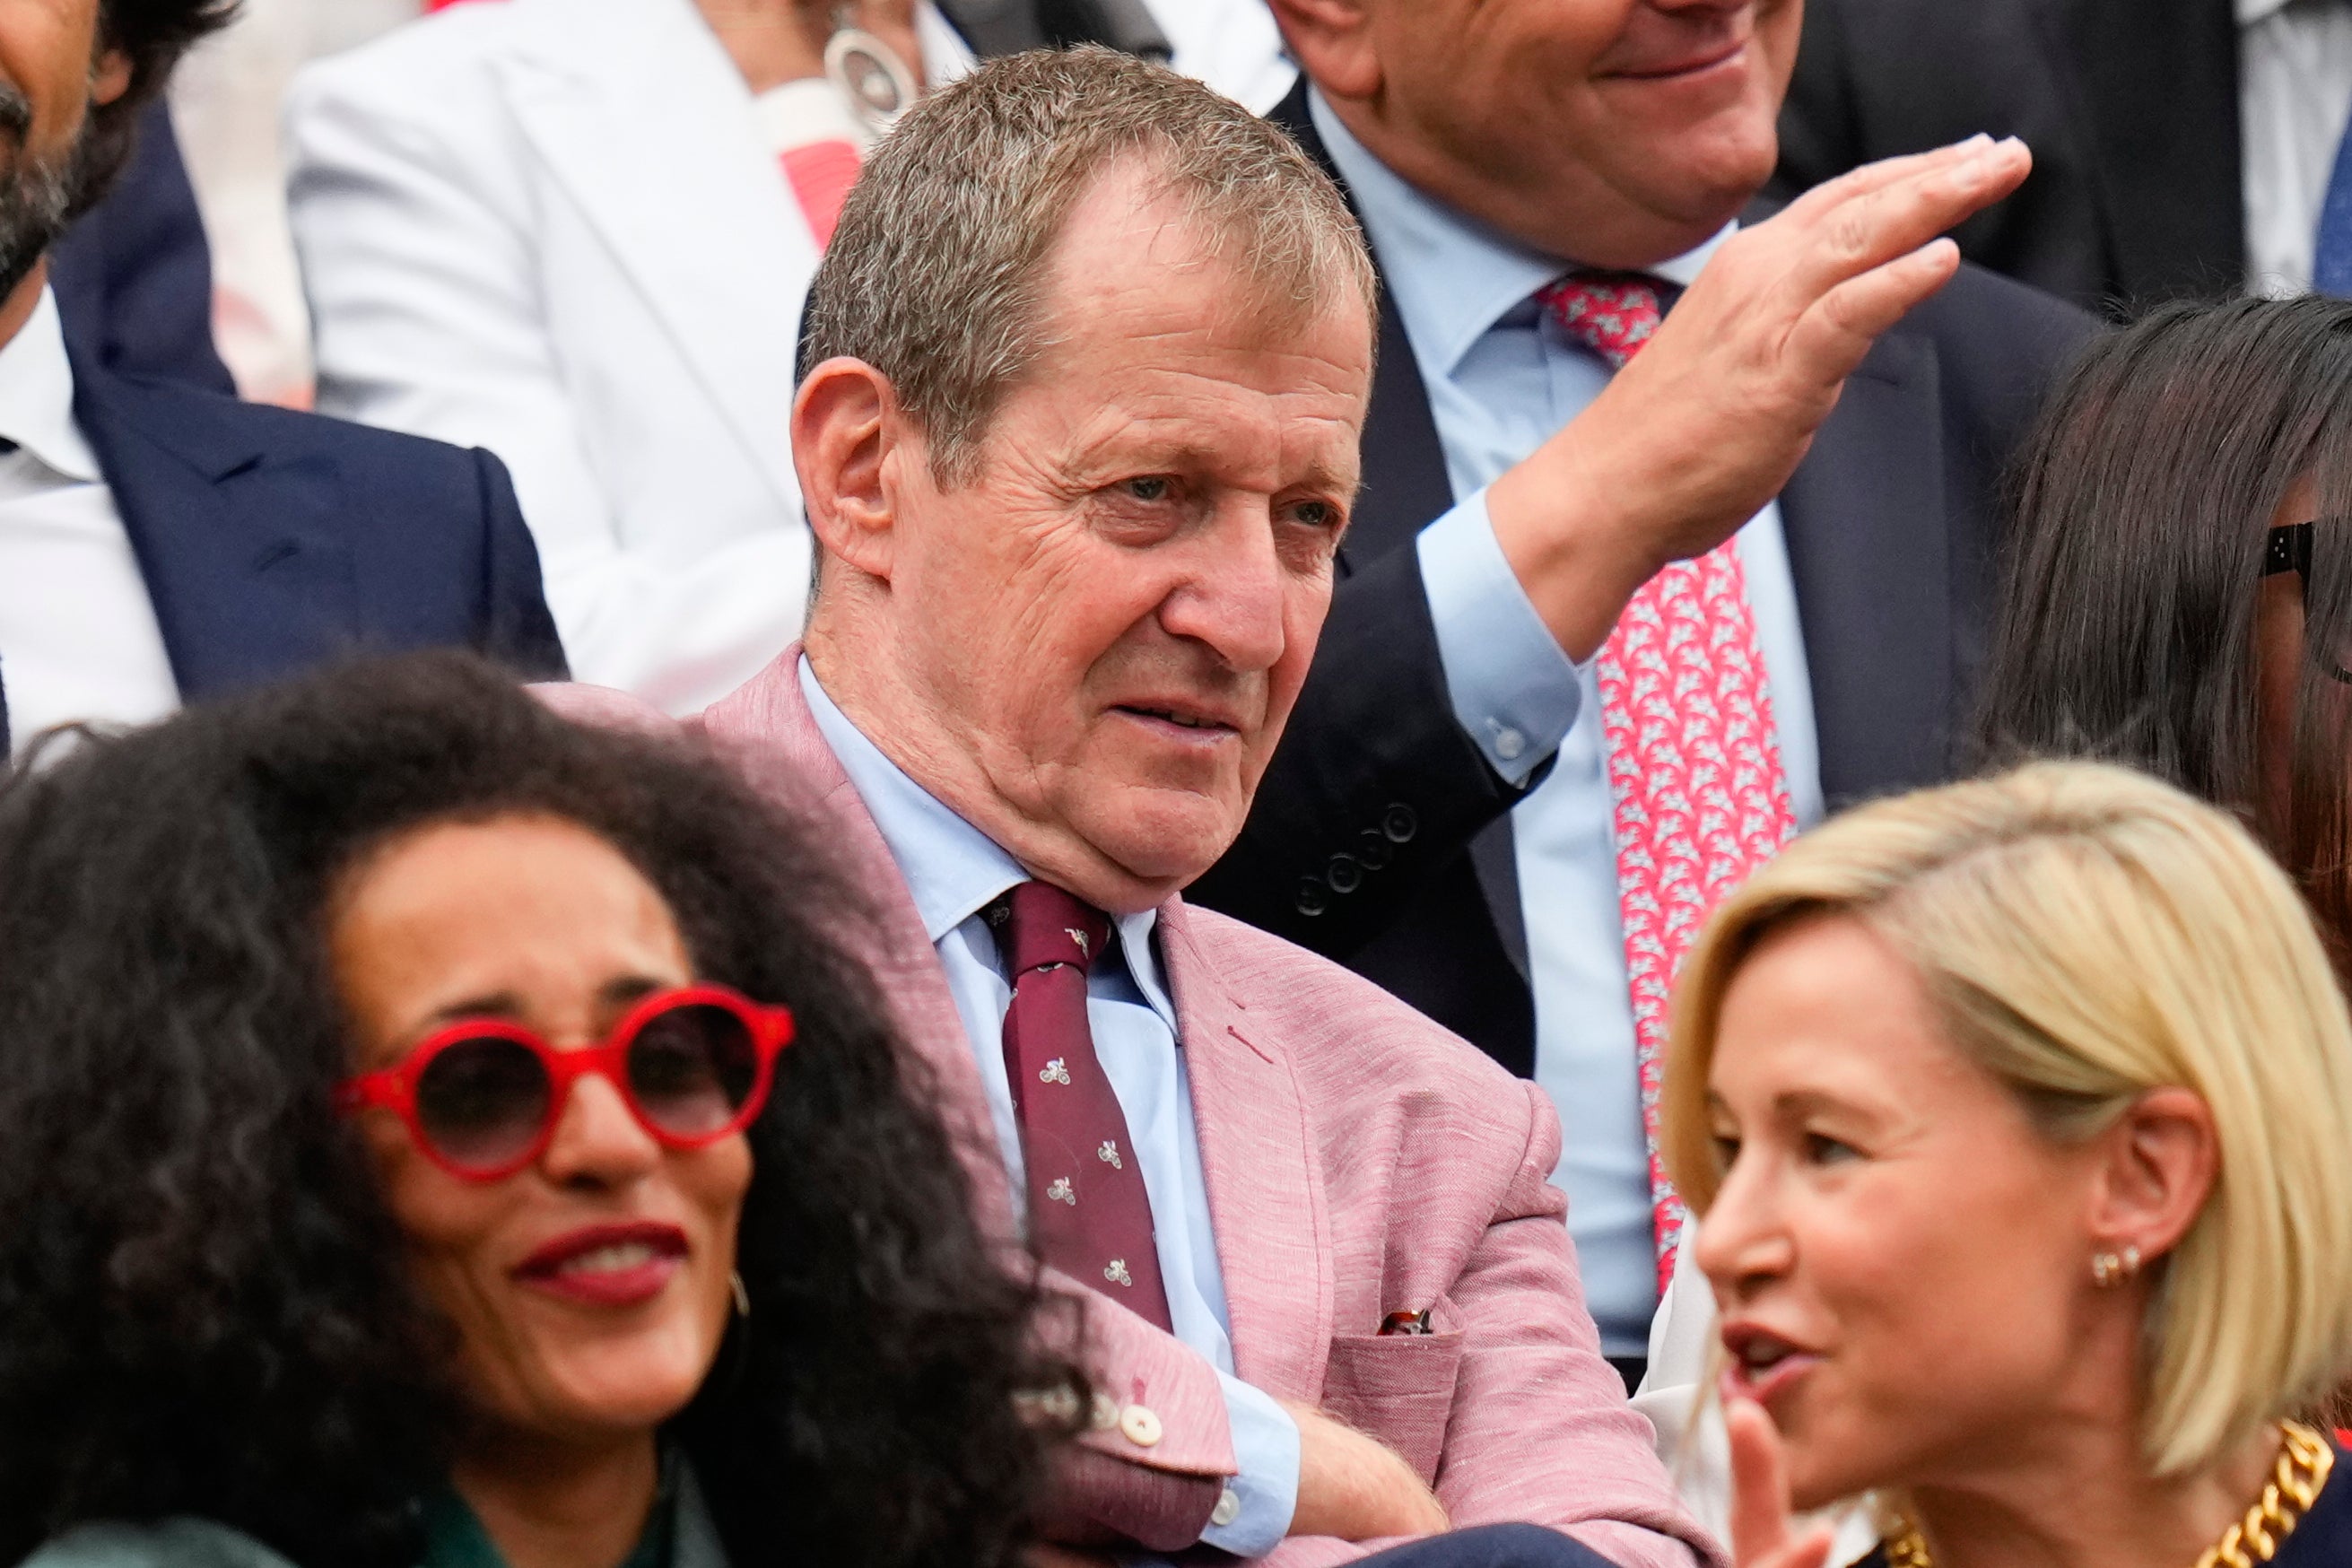 Former Labour politician turned podcast host Alastair Campbell